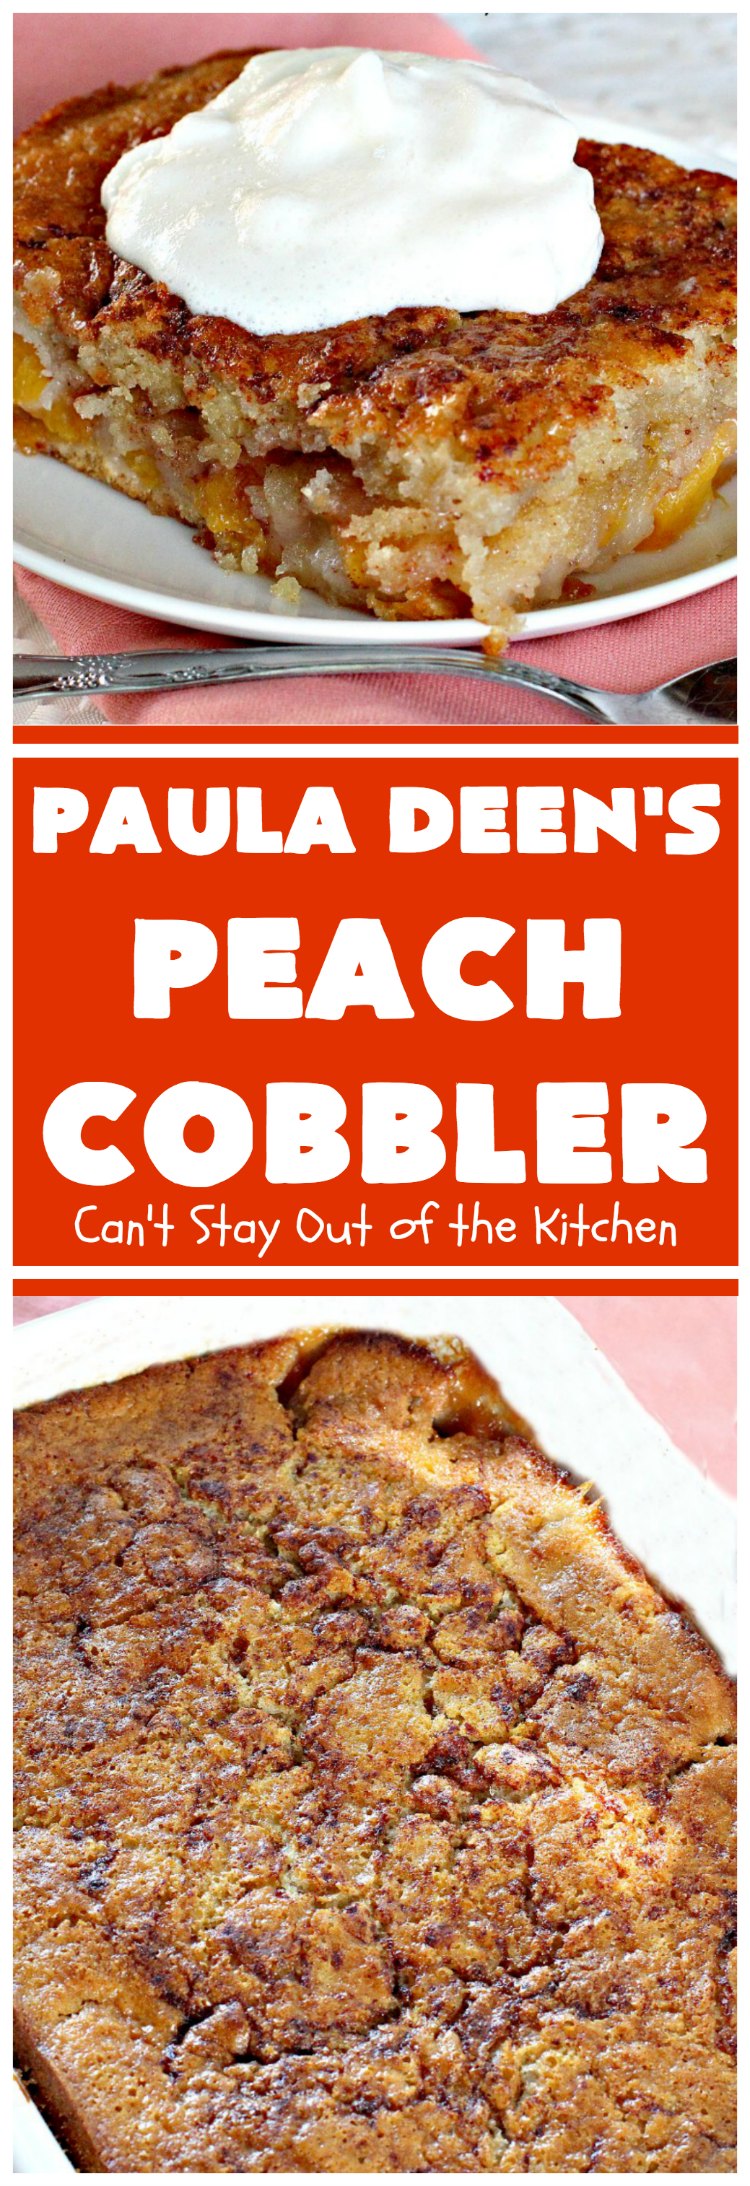 Paula Deen's Peach Cobbler | Can't Stay Out of the Kitchen